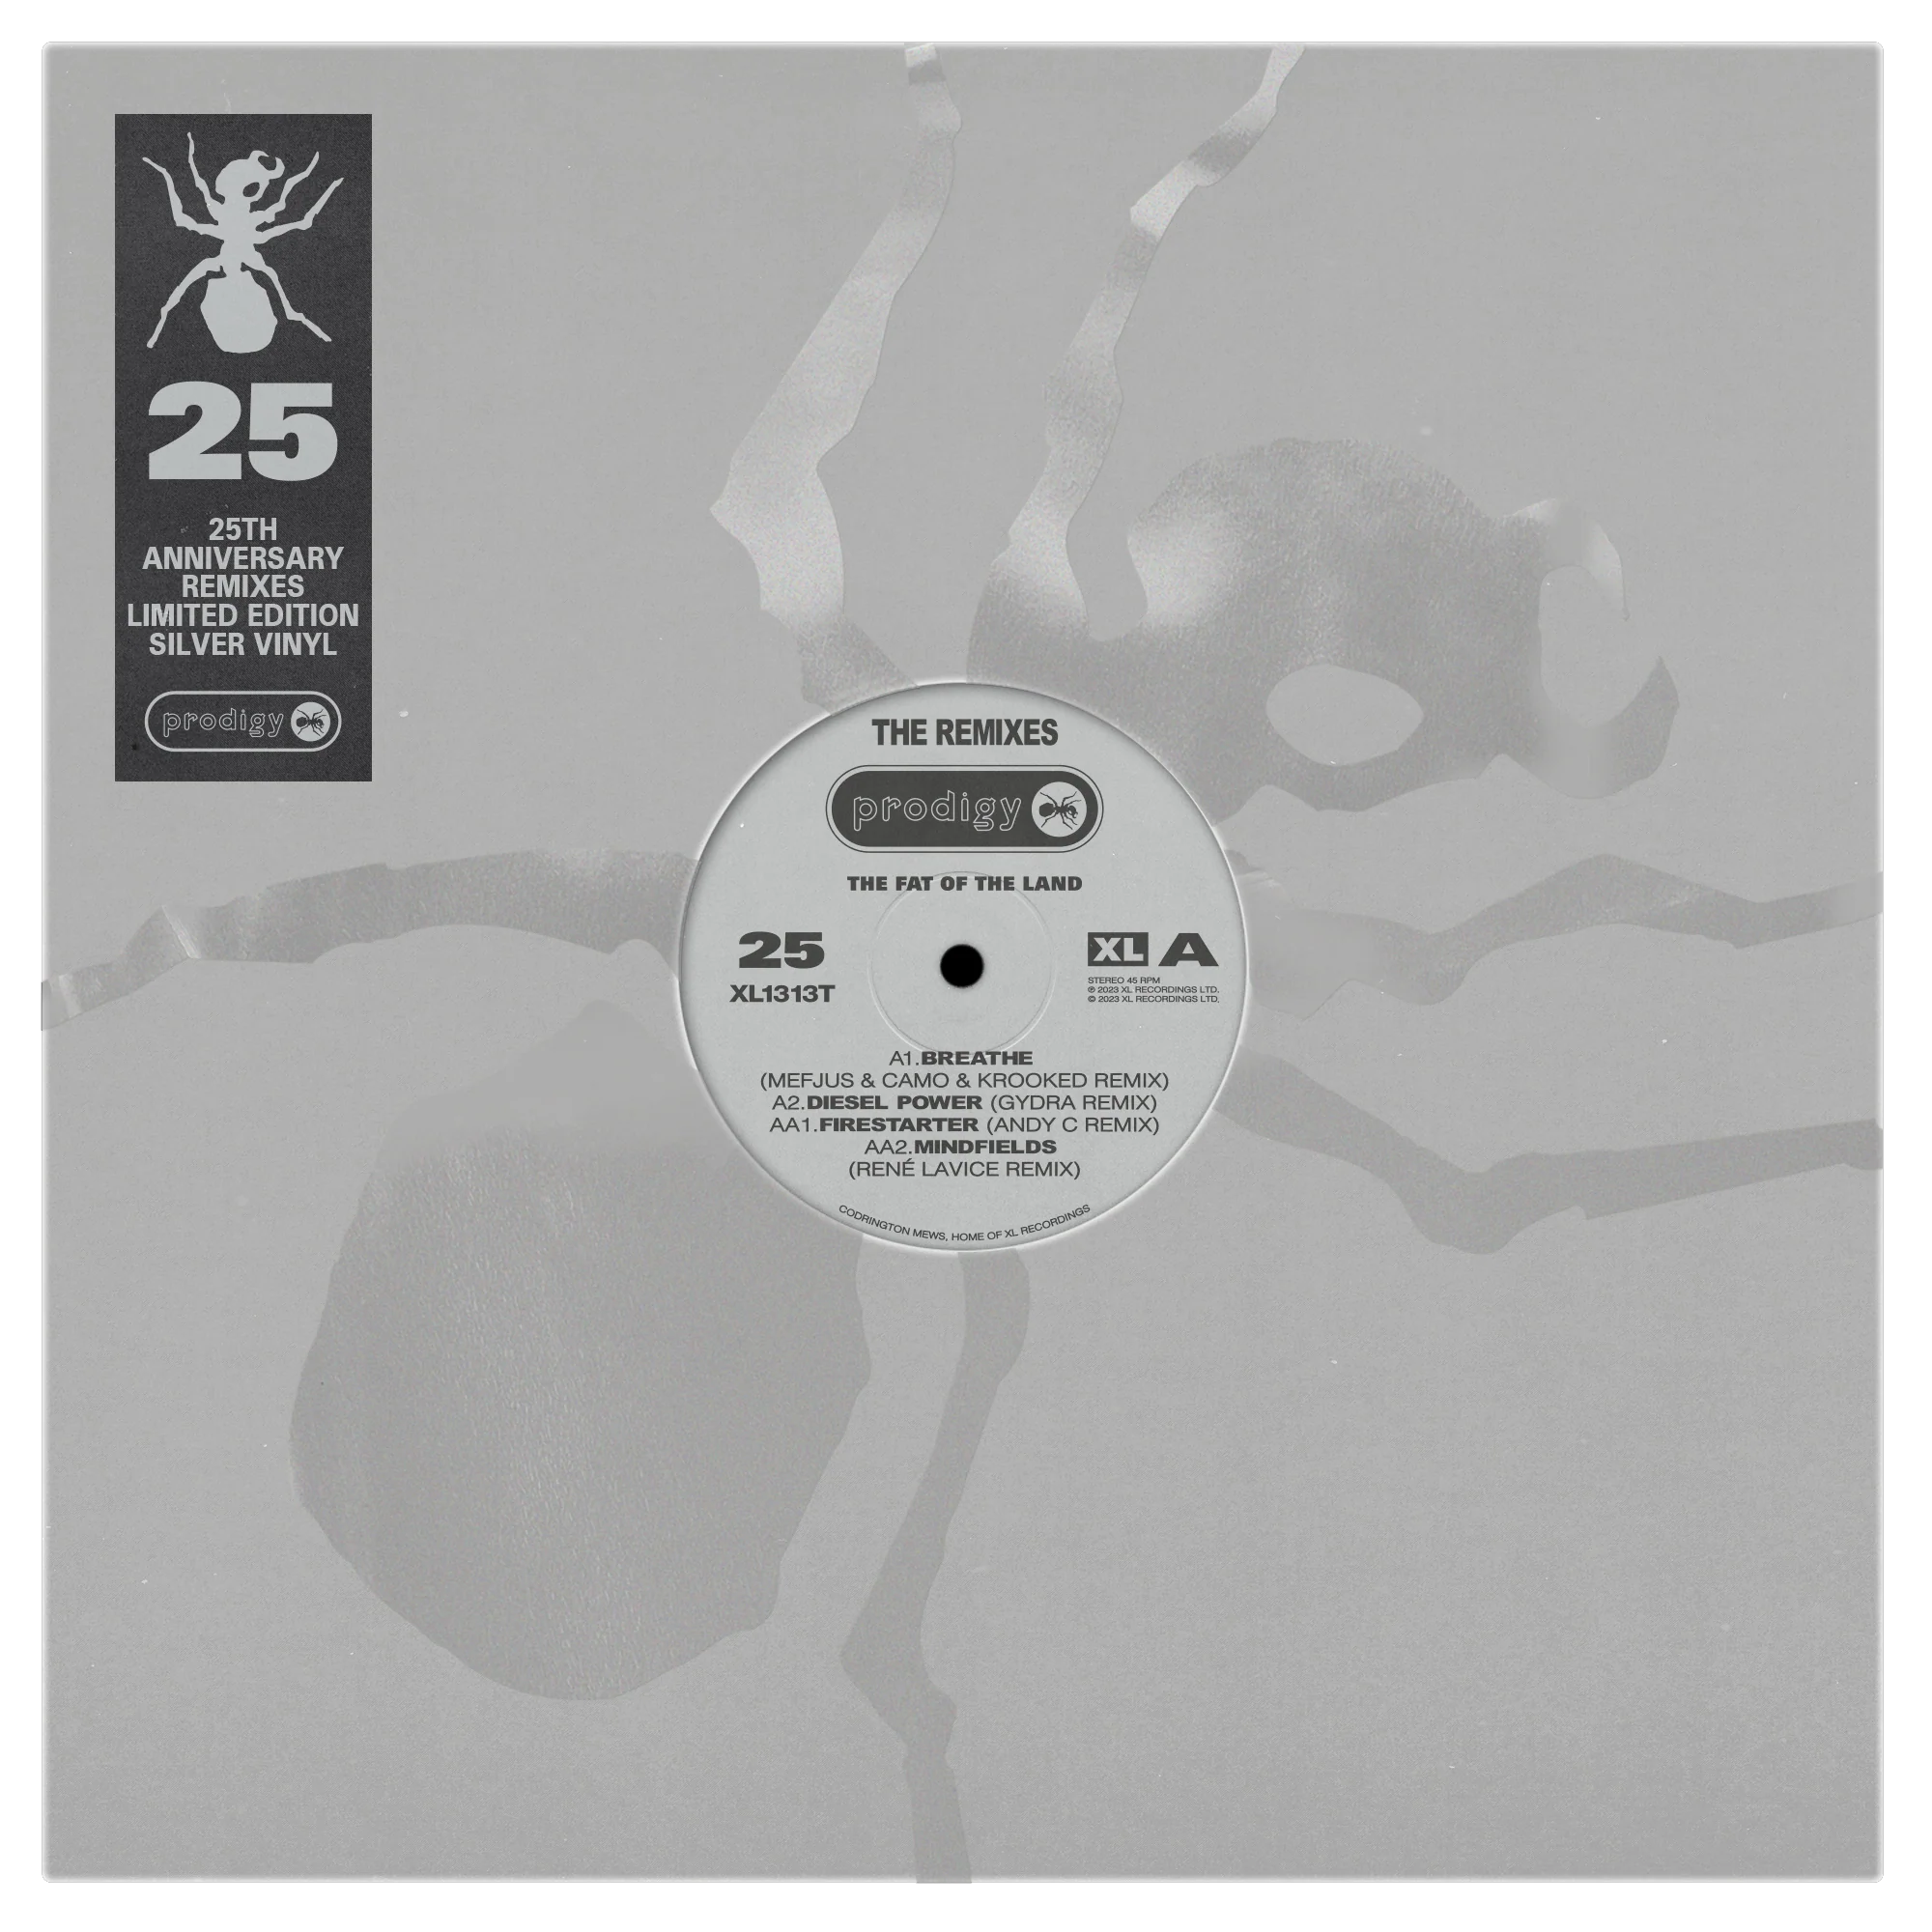 The Prodigy - The Fat Of The Land (25th Anniversary Remixes): Limited Silver Vinyl 12" Single 